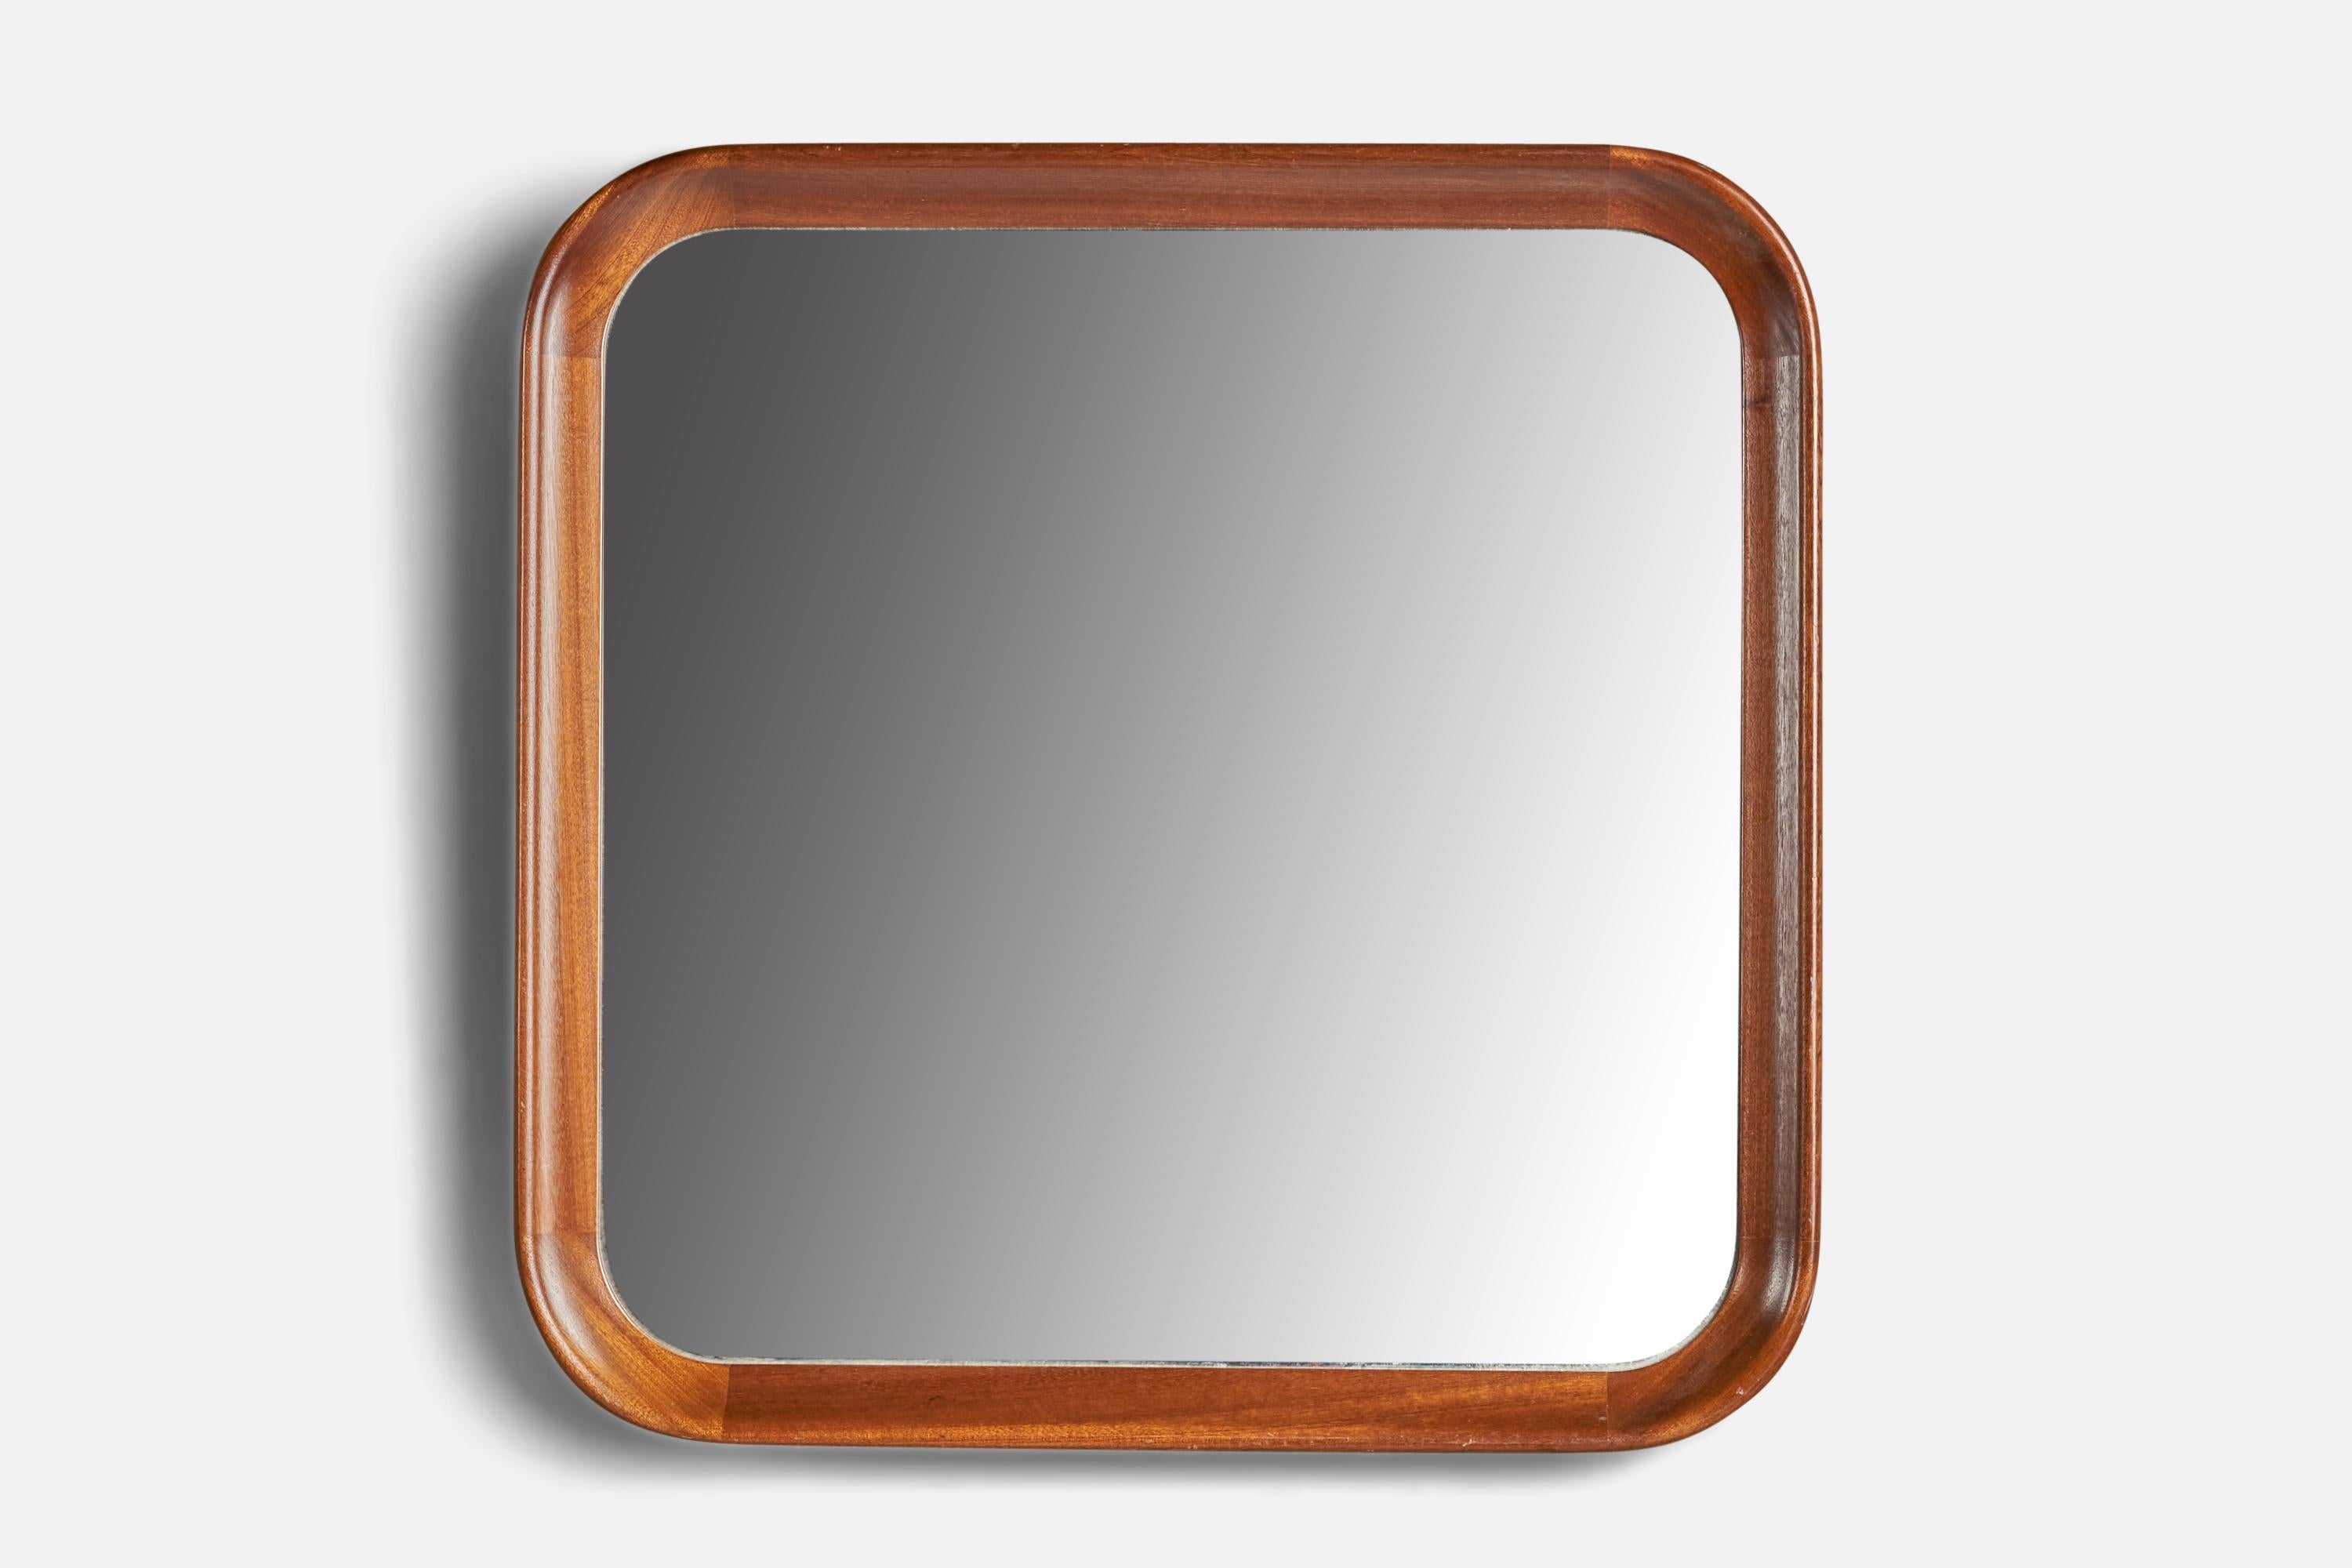 A solid oak wall mirror designed and produced by Stockmann OY, Finland, c. 1950s.